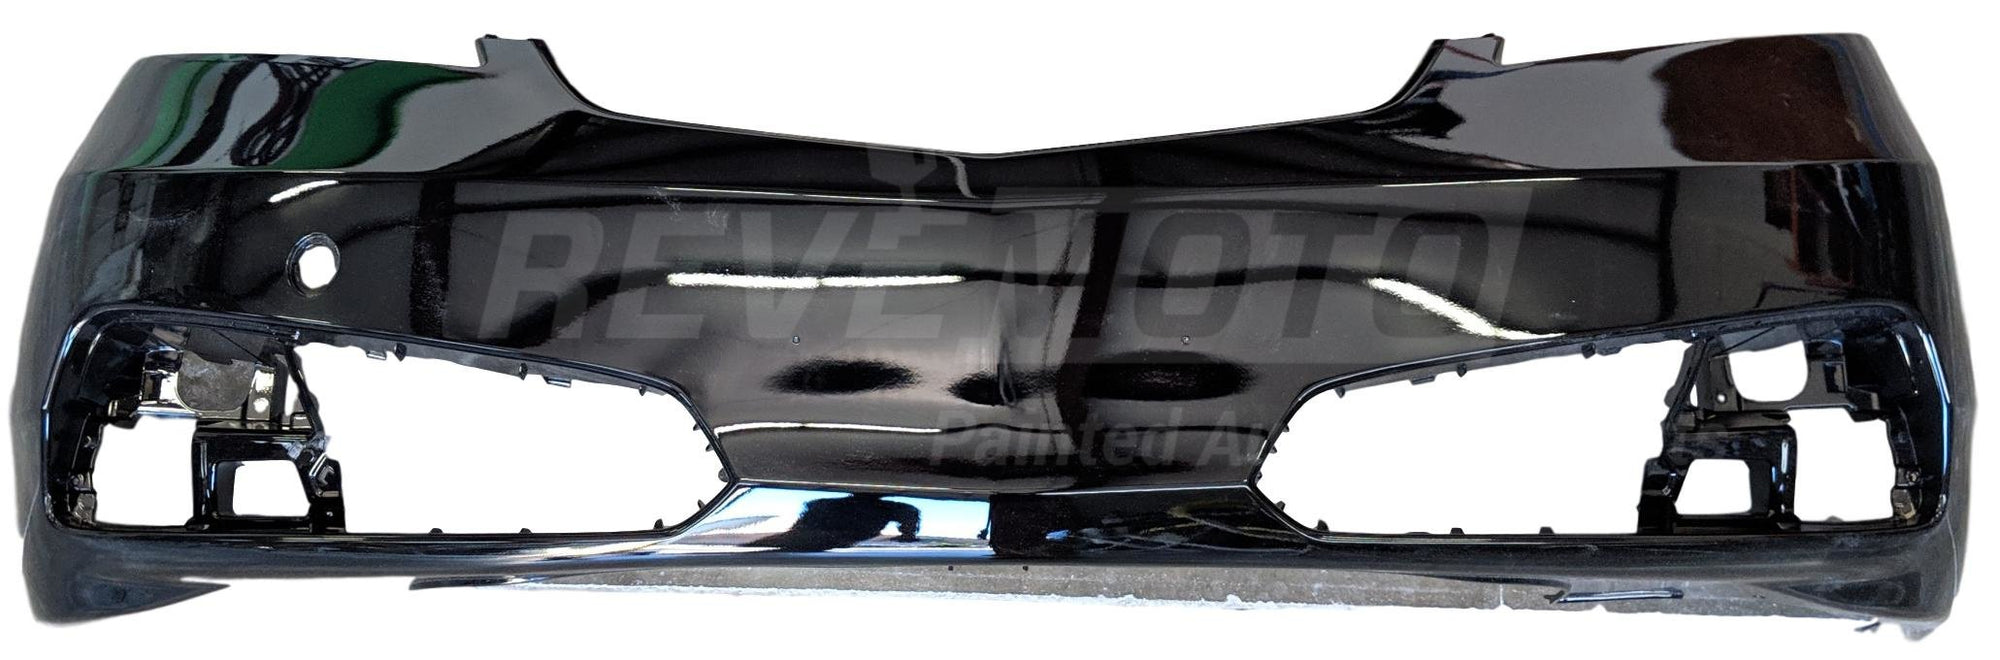 2013 Acura TL : Front Bumper Painted